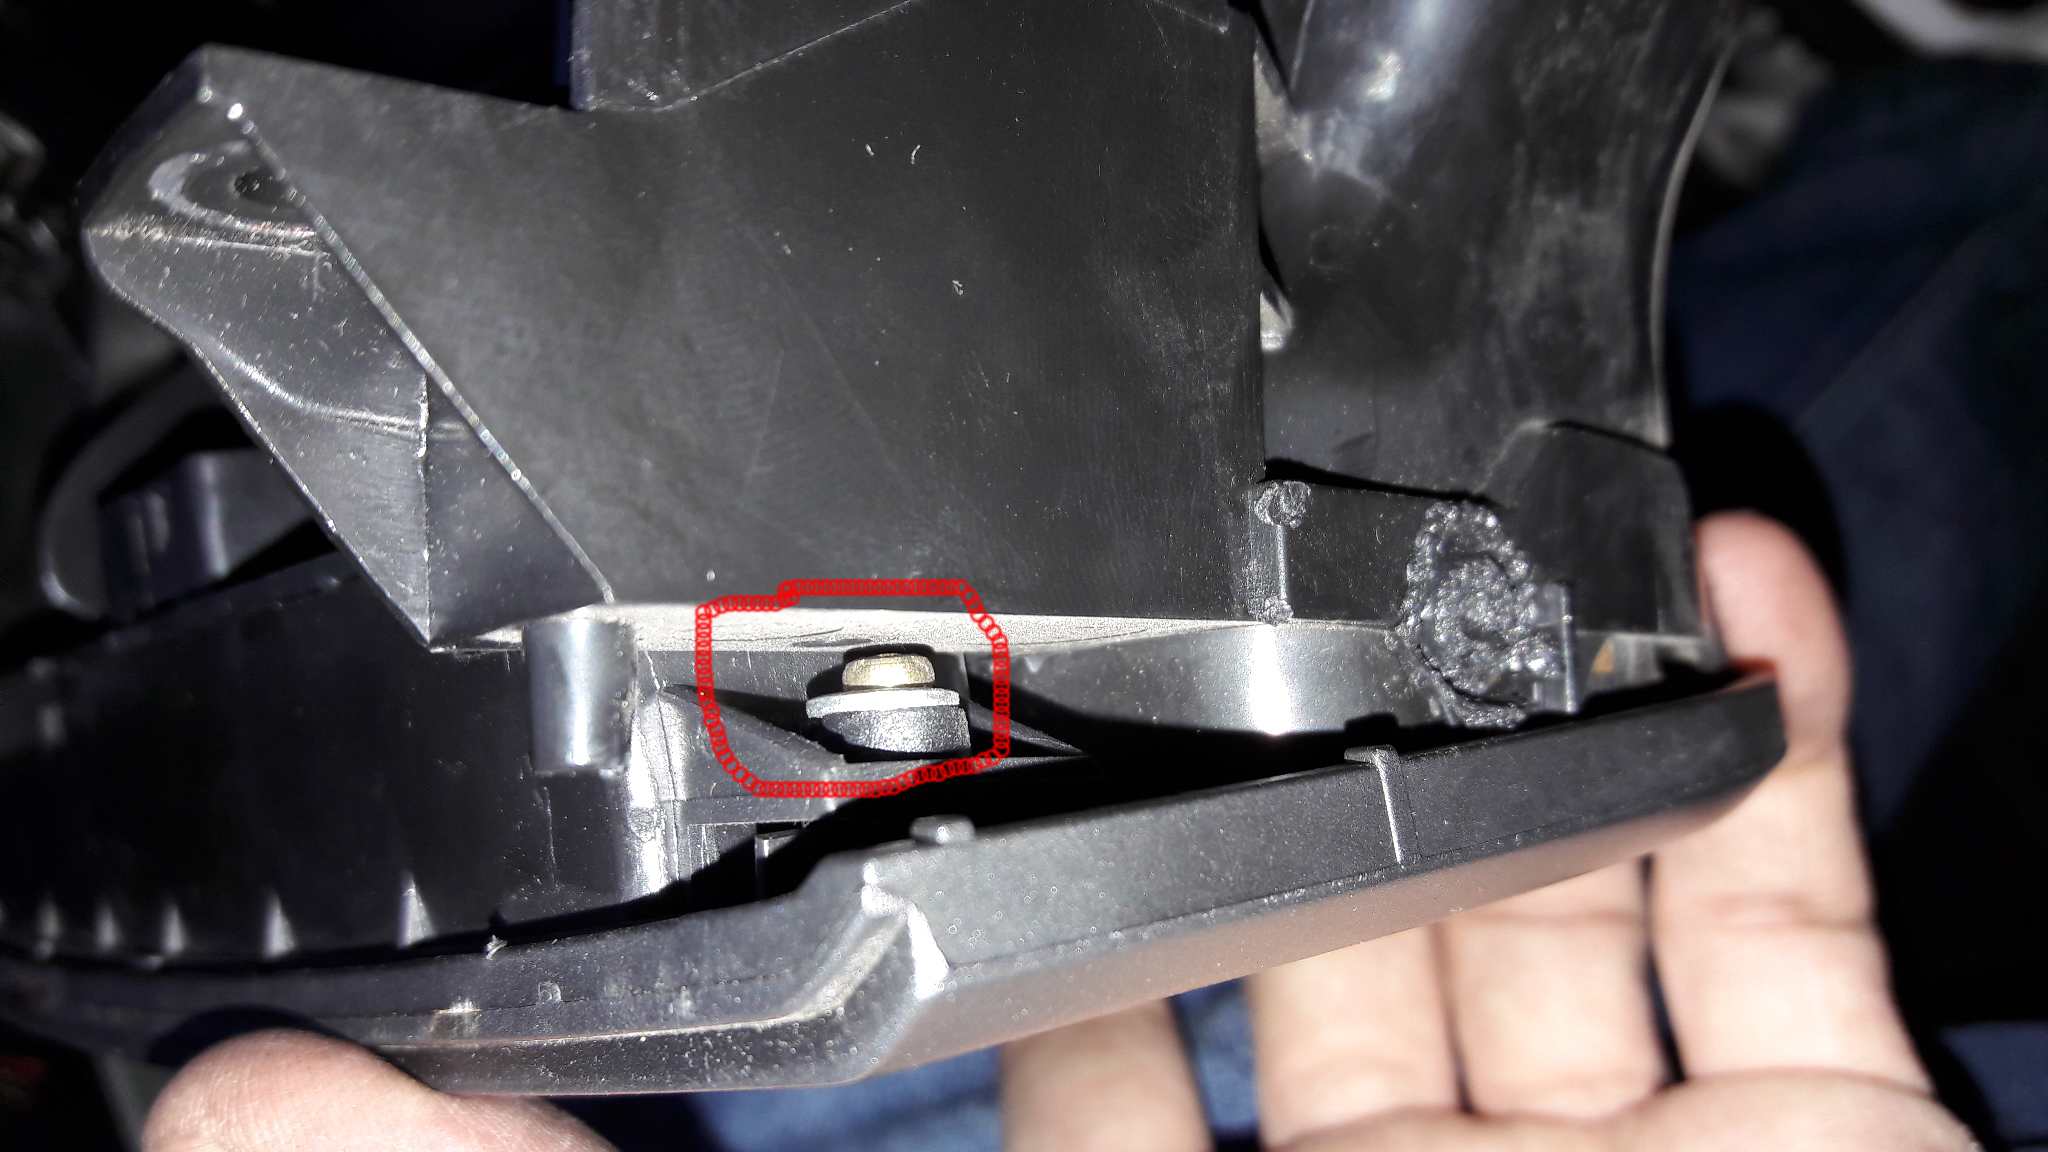 Screw for disassemble button???